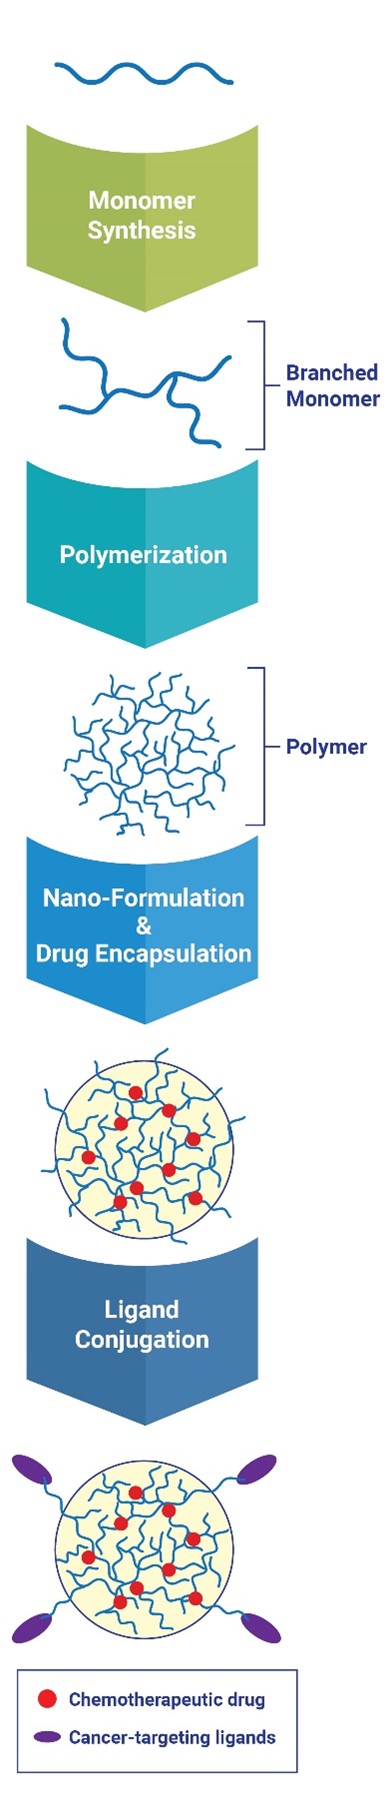 A blue squiggly line represents a starting material that is then converted, through monomer synthesis, to a squiggly line with branches off it, the branched monomer. Polymerization leads to a polymer that looks like a web of squiggly lines. Nano-formulation and drug encapsulation leads to a shell around the polymer with red circles inside, representing the chemotherapeutic drug encapsulated in the polymer. Ligand conjugation leads to the addition of cancer-targeting ligands on the outside of the capsule.